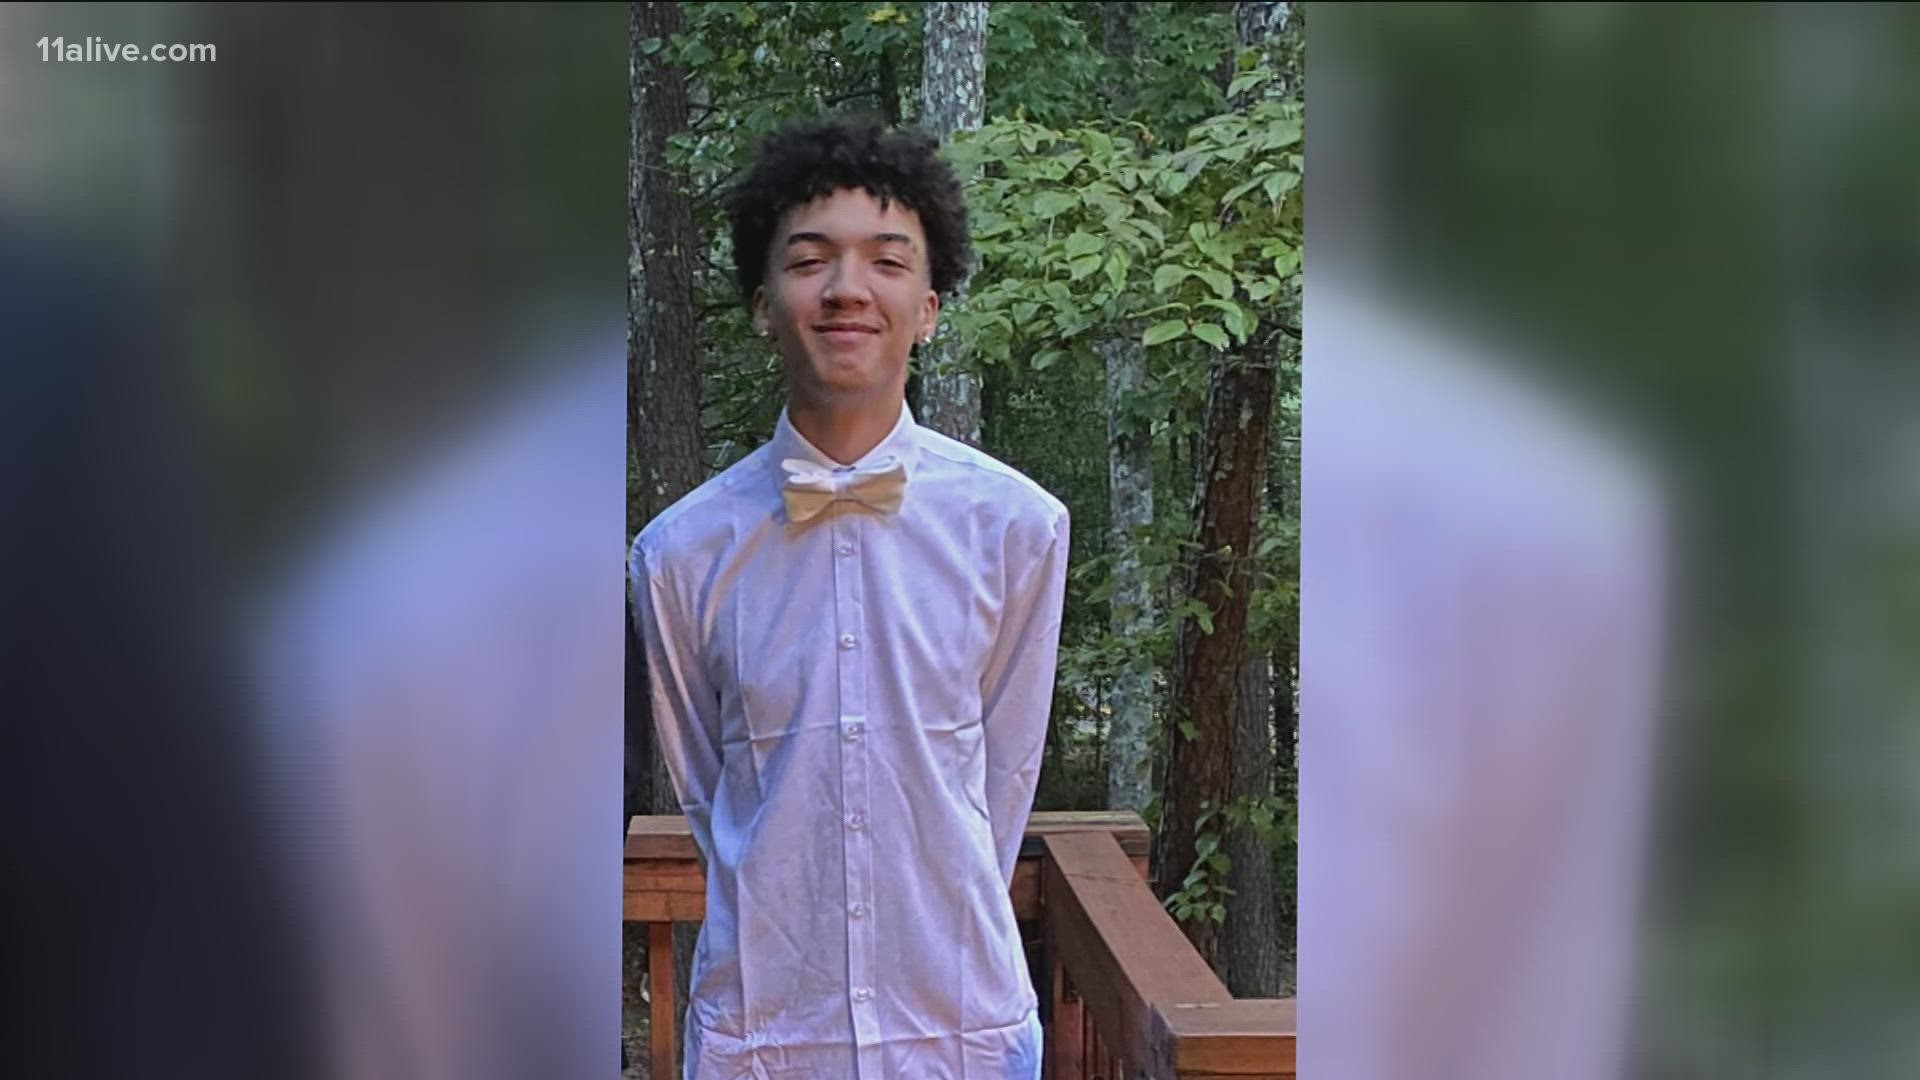 We're hearing from the grief-stricken mother of a 14-year-old boy who was fatally shot at a house part in Cherokee County over the weekend.